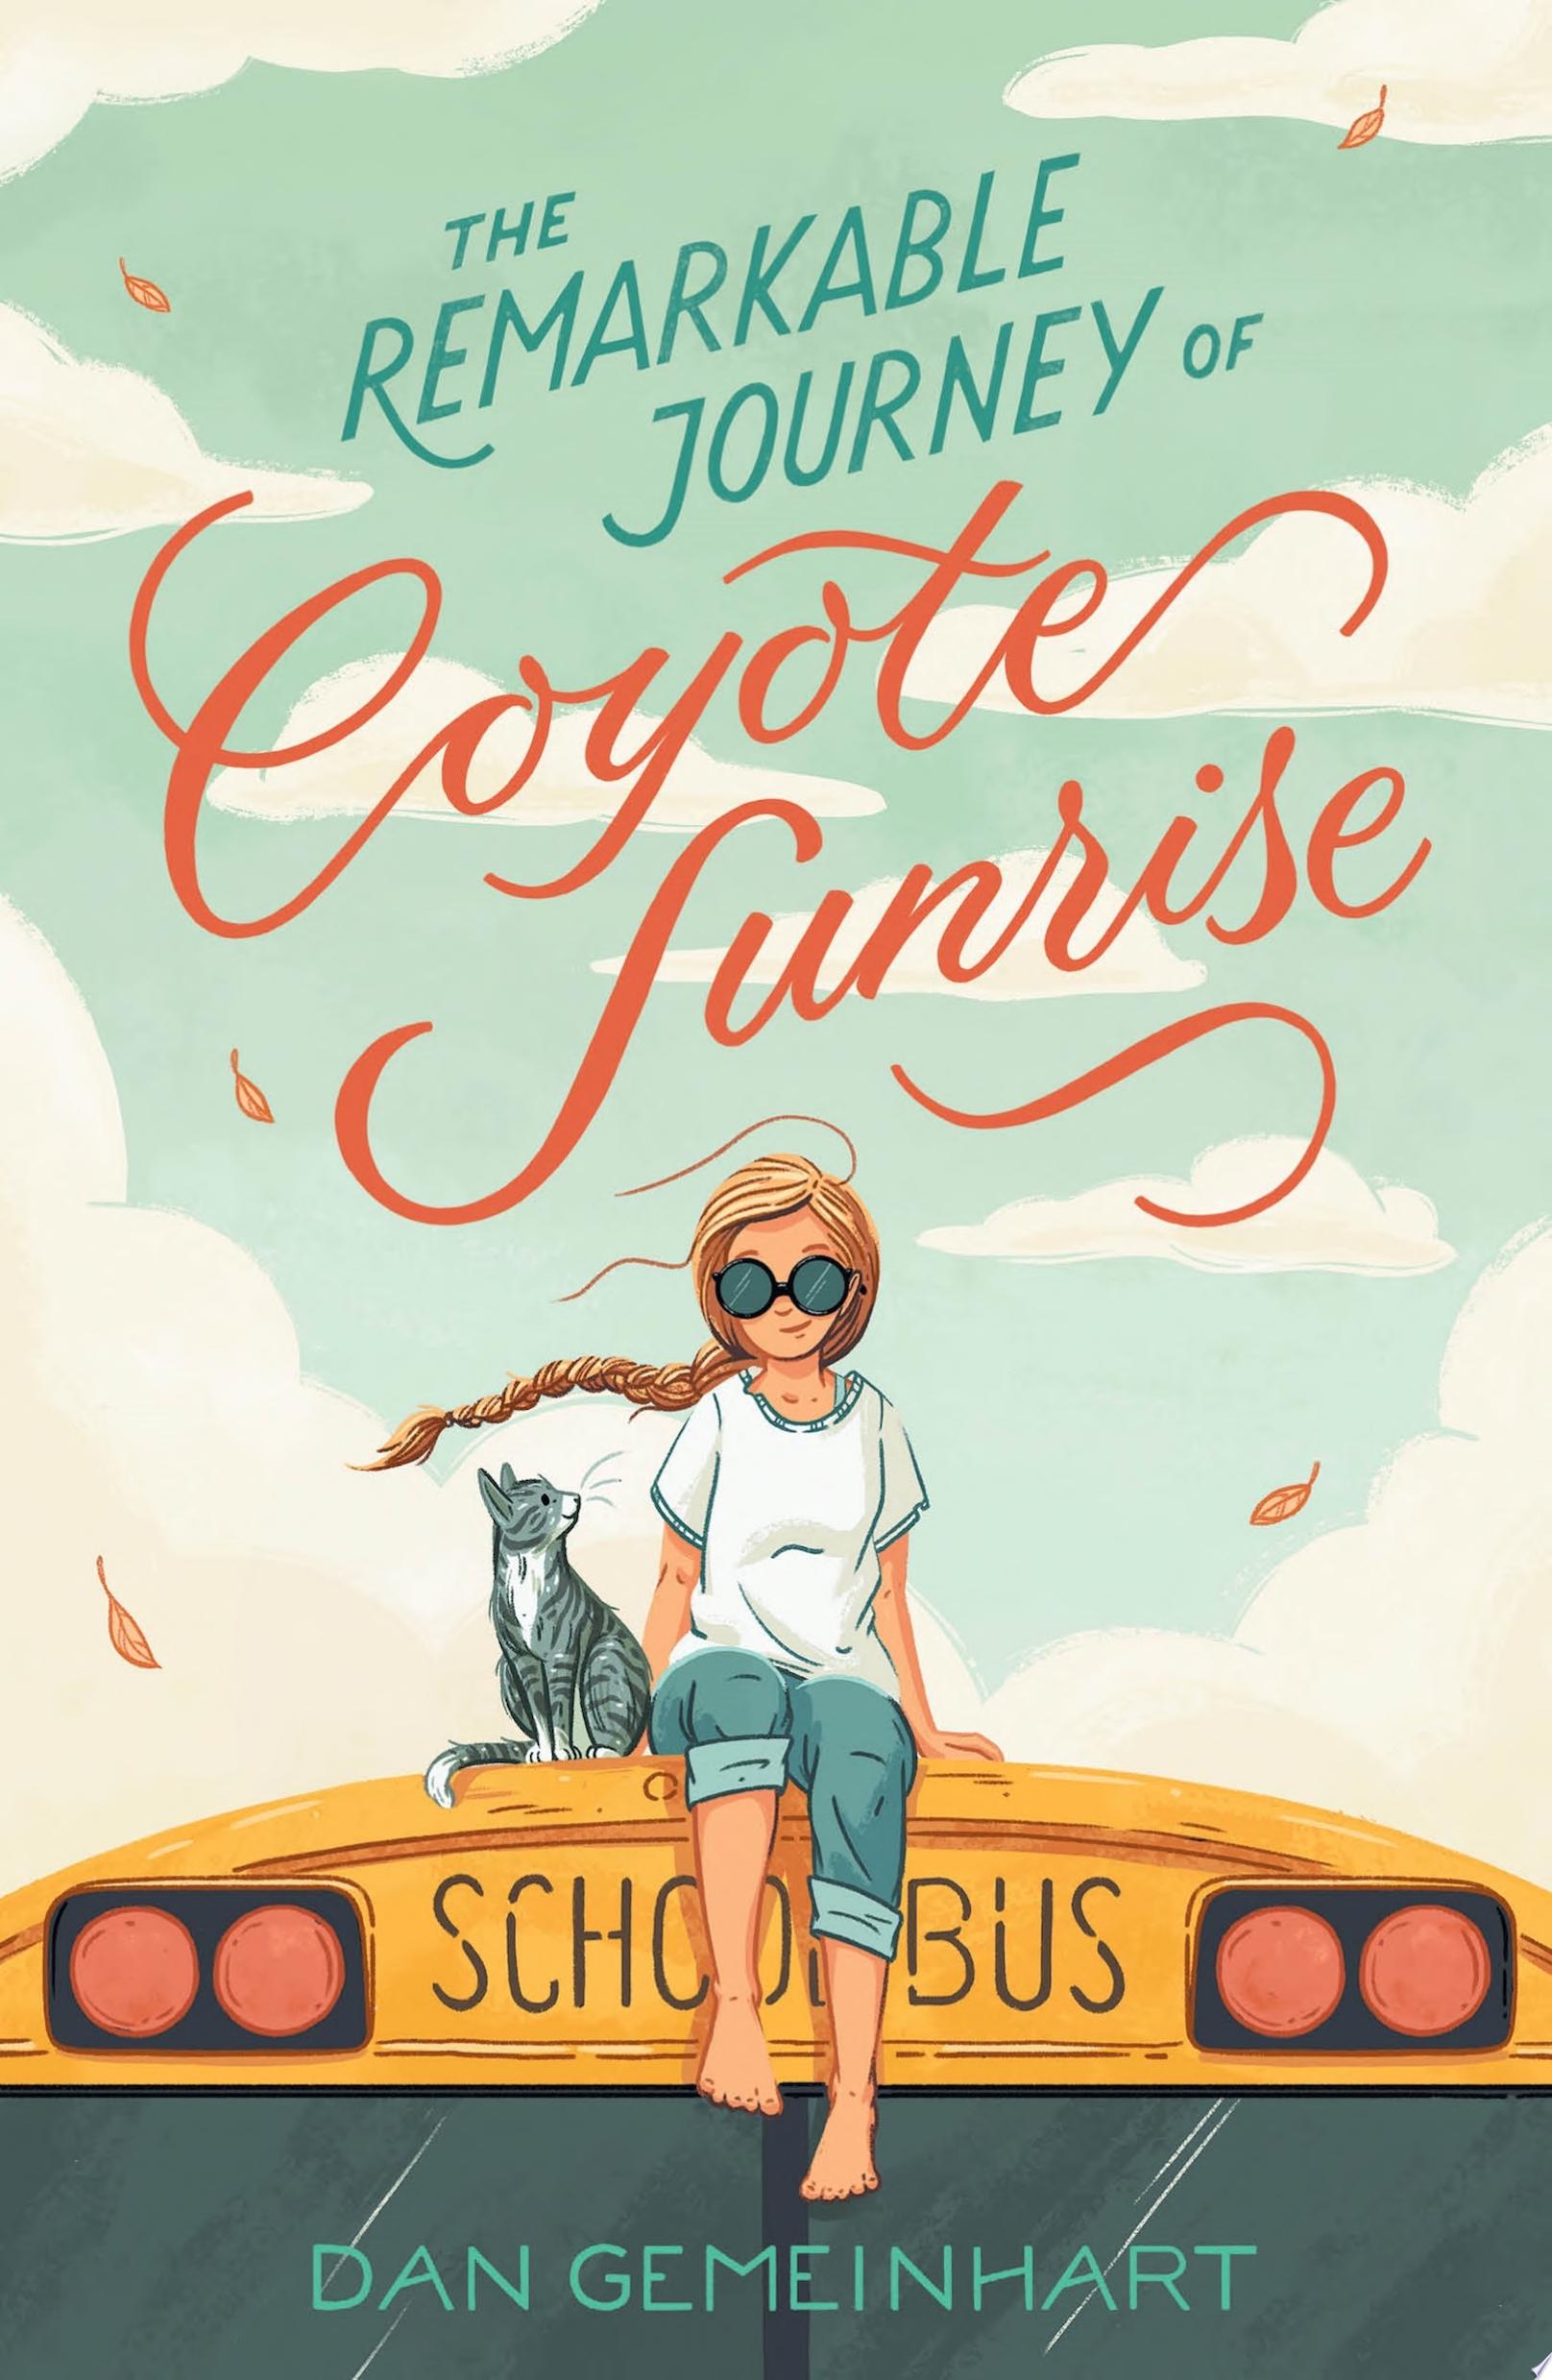 Image for "The Remarkable Journey of Coyote Sunrise"